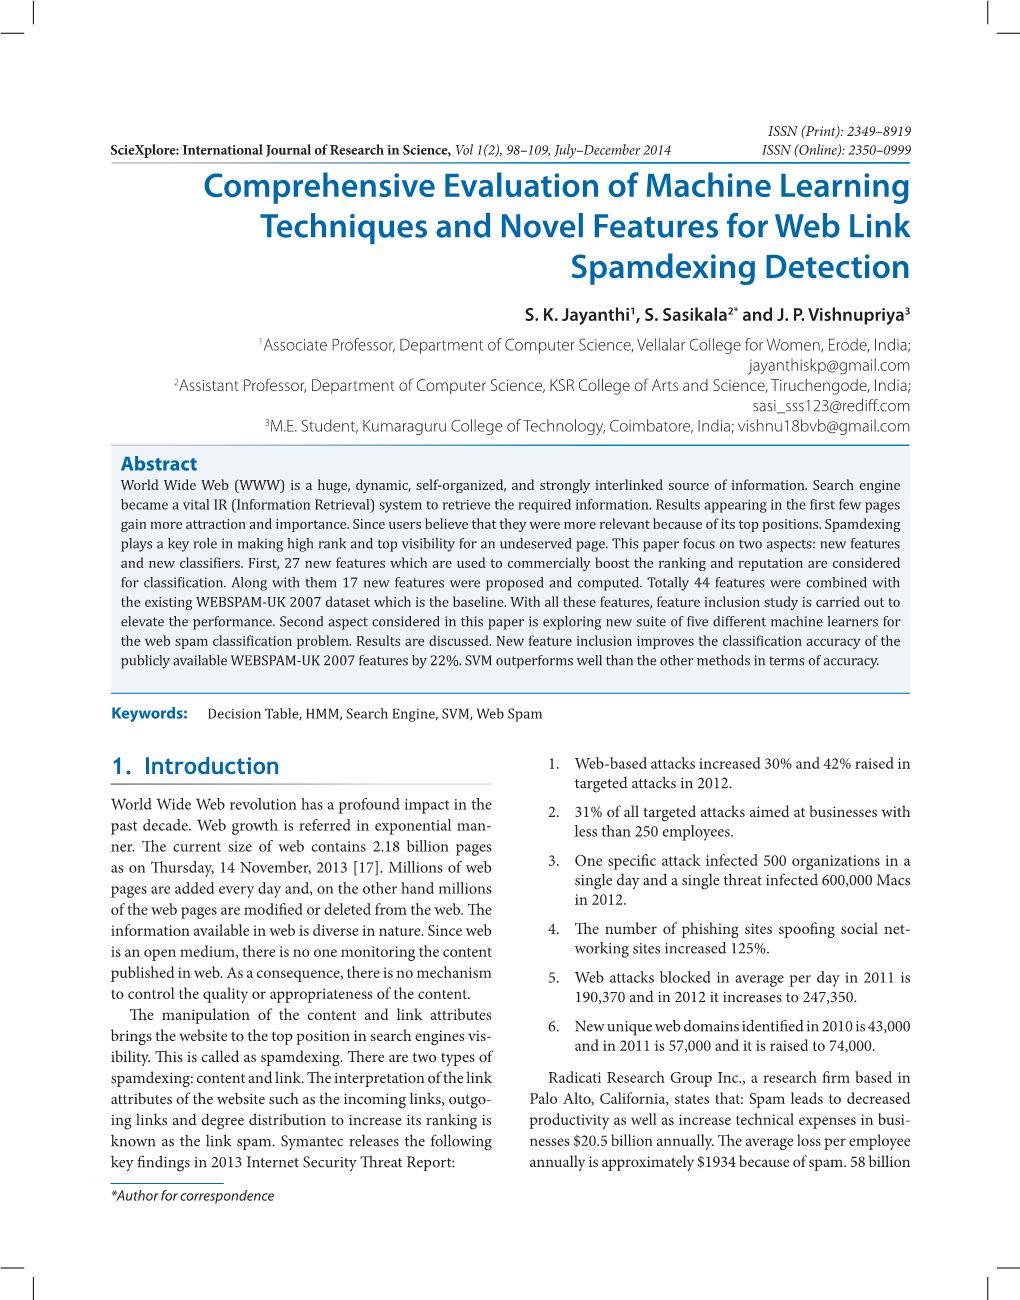 Comprehensive Evaluation of Machine Learning Techniques and Novel Features for Web Link Spamdexing Detection